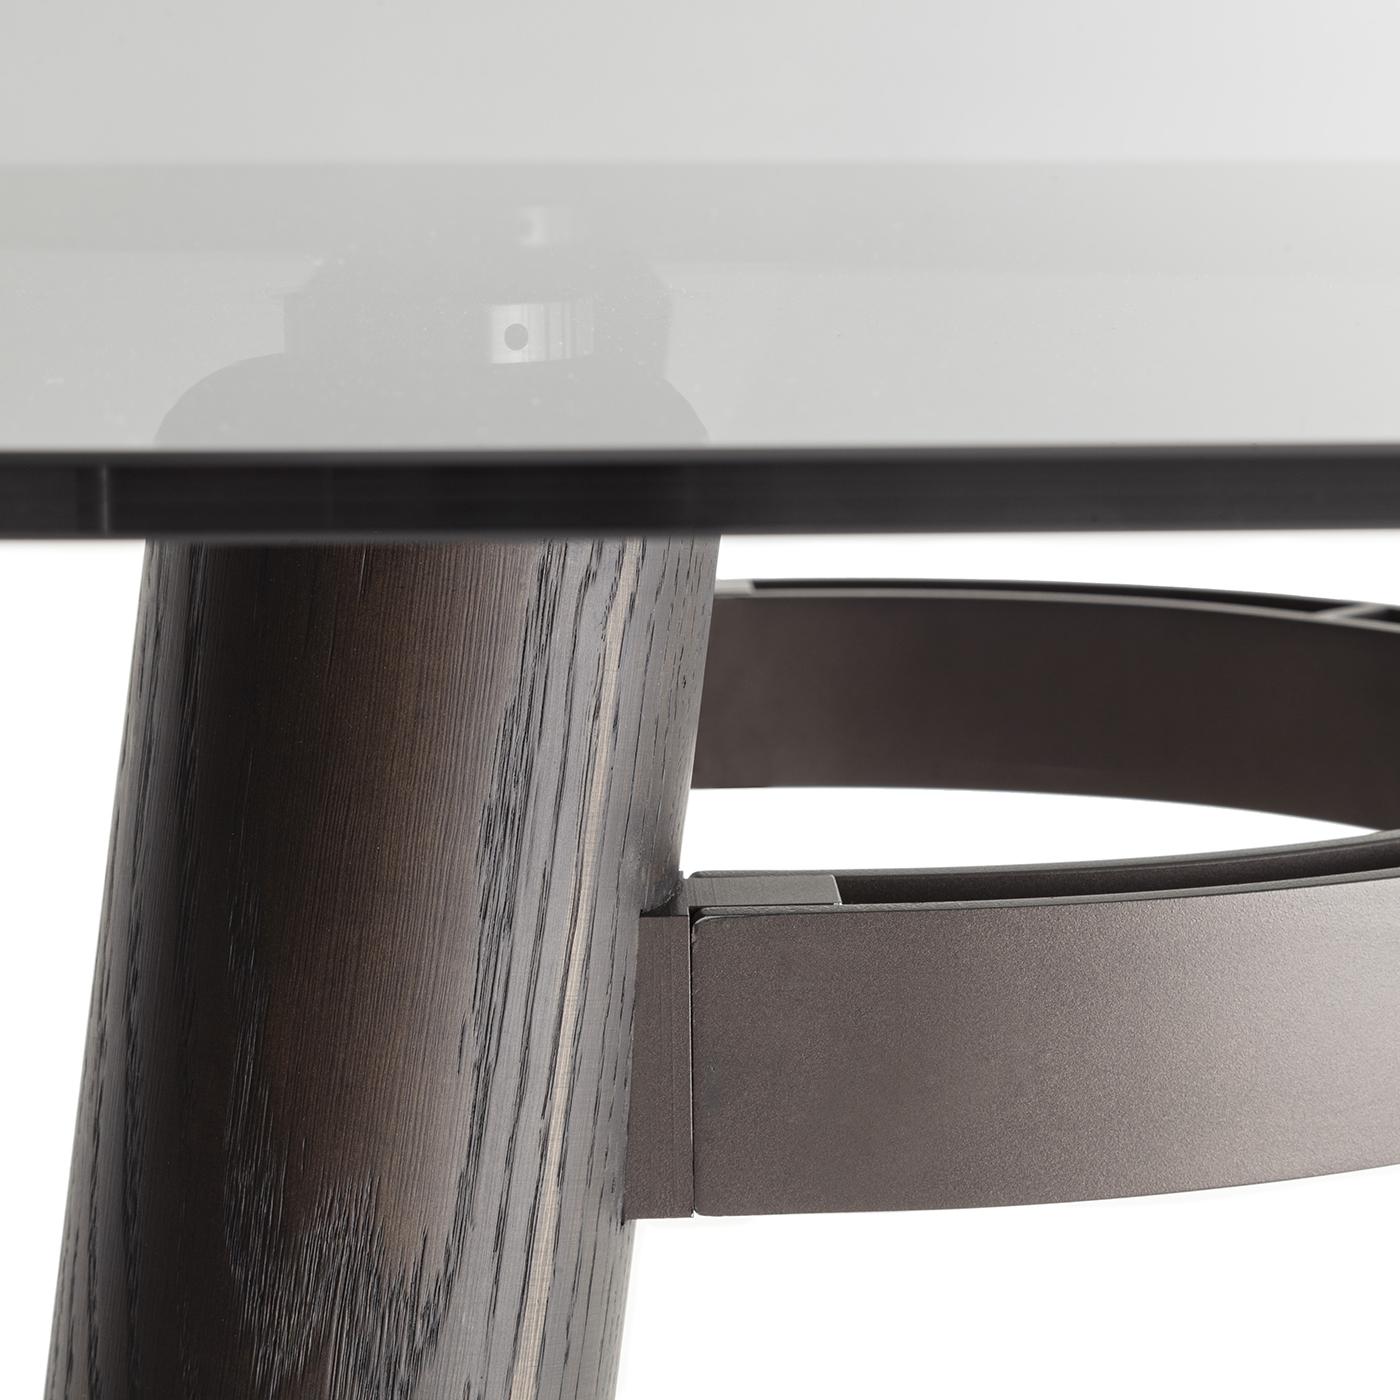 Turned legs in solid oak offered in a deep Laguna finish immediately channel the bold charm of this modern-style table. Ideally complementing exclusive dining rooms, its convivial spirit seems confirmed by the rounded shape of its elongated